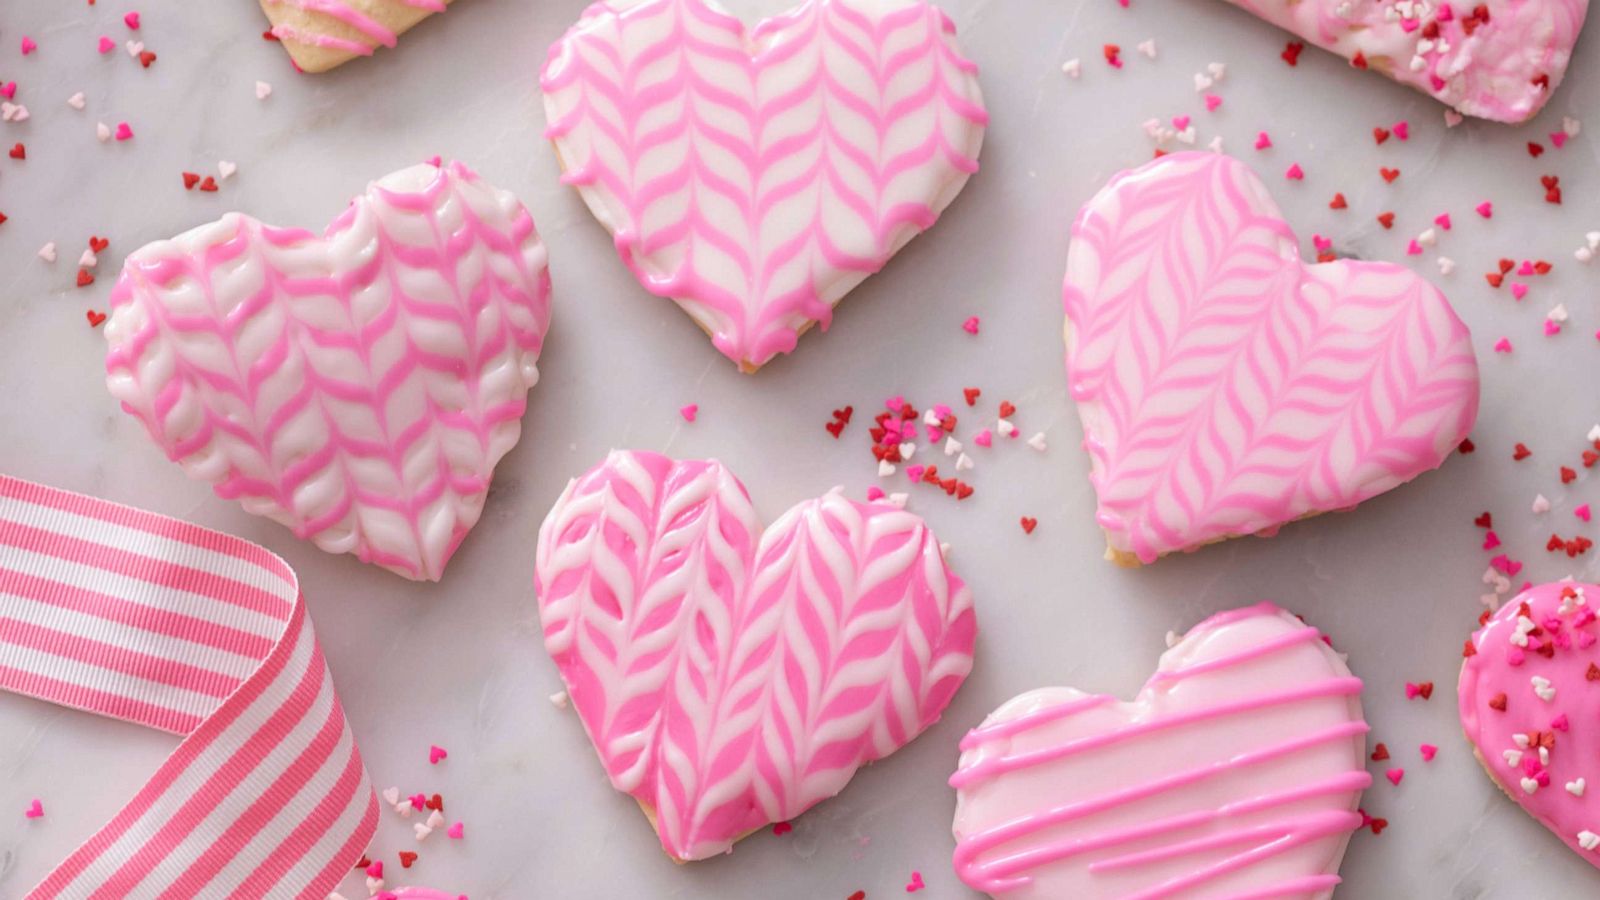 Capture the heart of your Valentine with these sweet sugar cookies